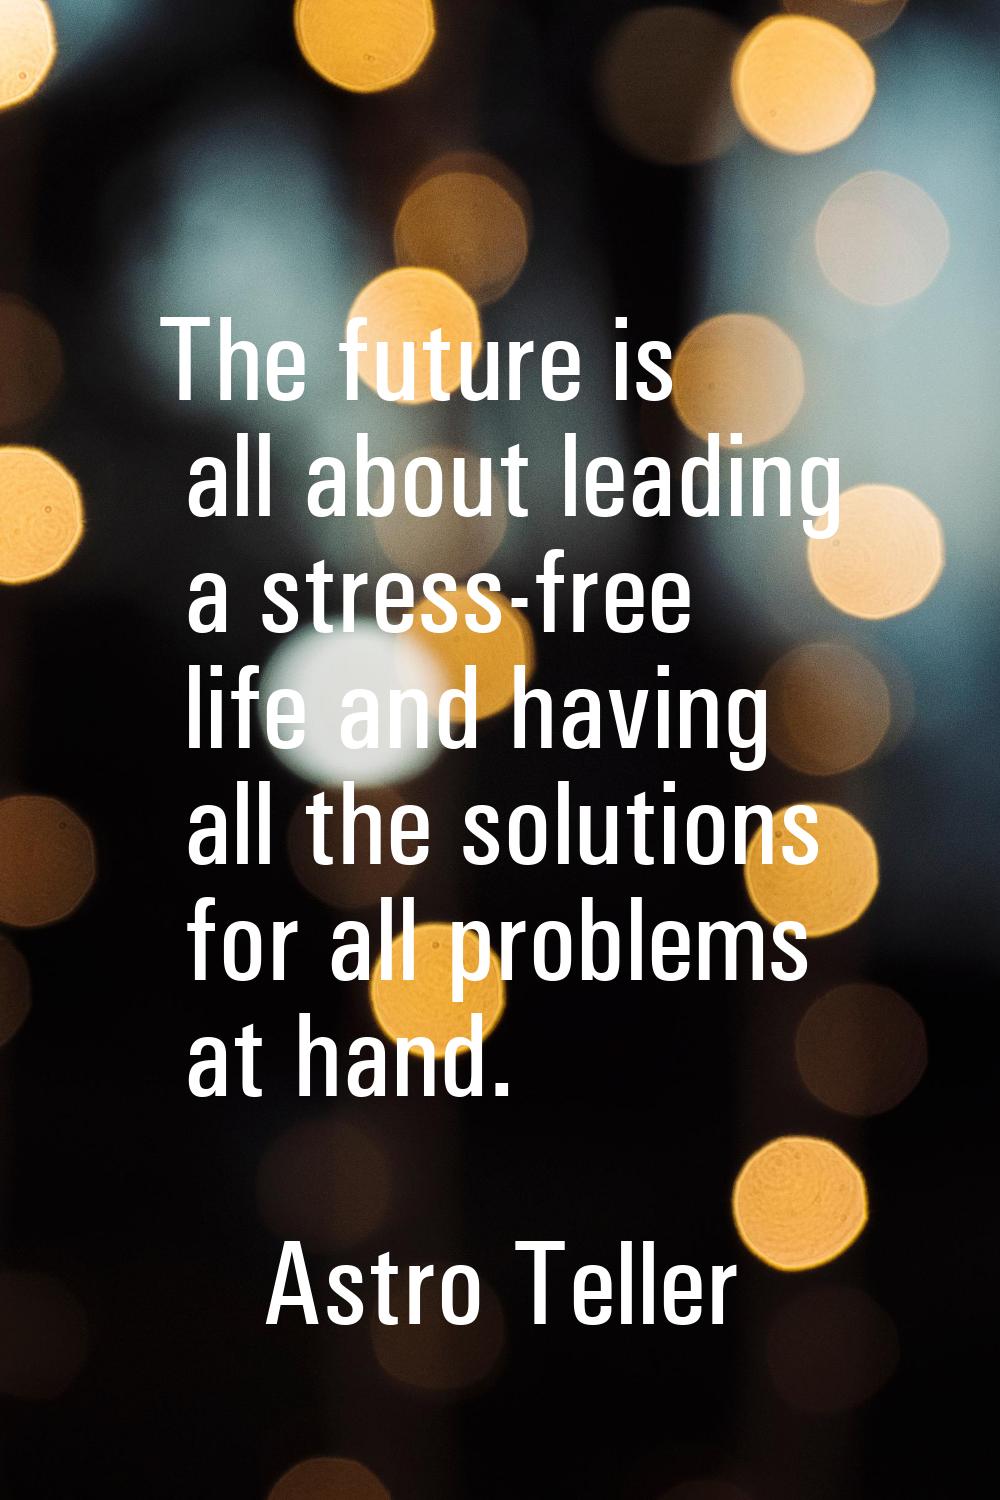 The future is all about leading a stress-free life and having all the solutions for all problems at